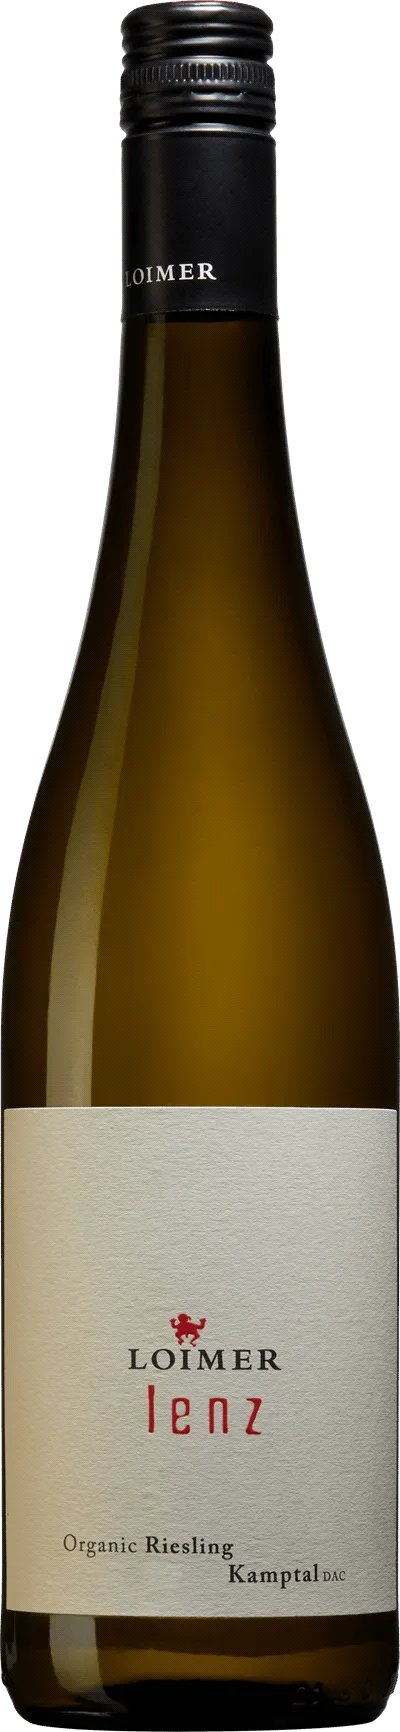 Bottle of Loimer Lenz Riesling from search results